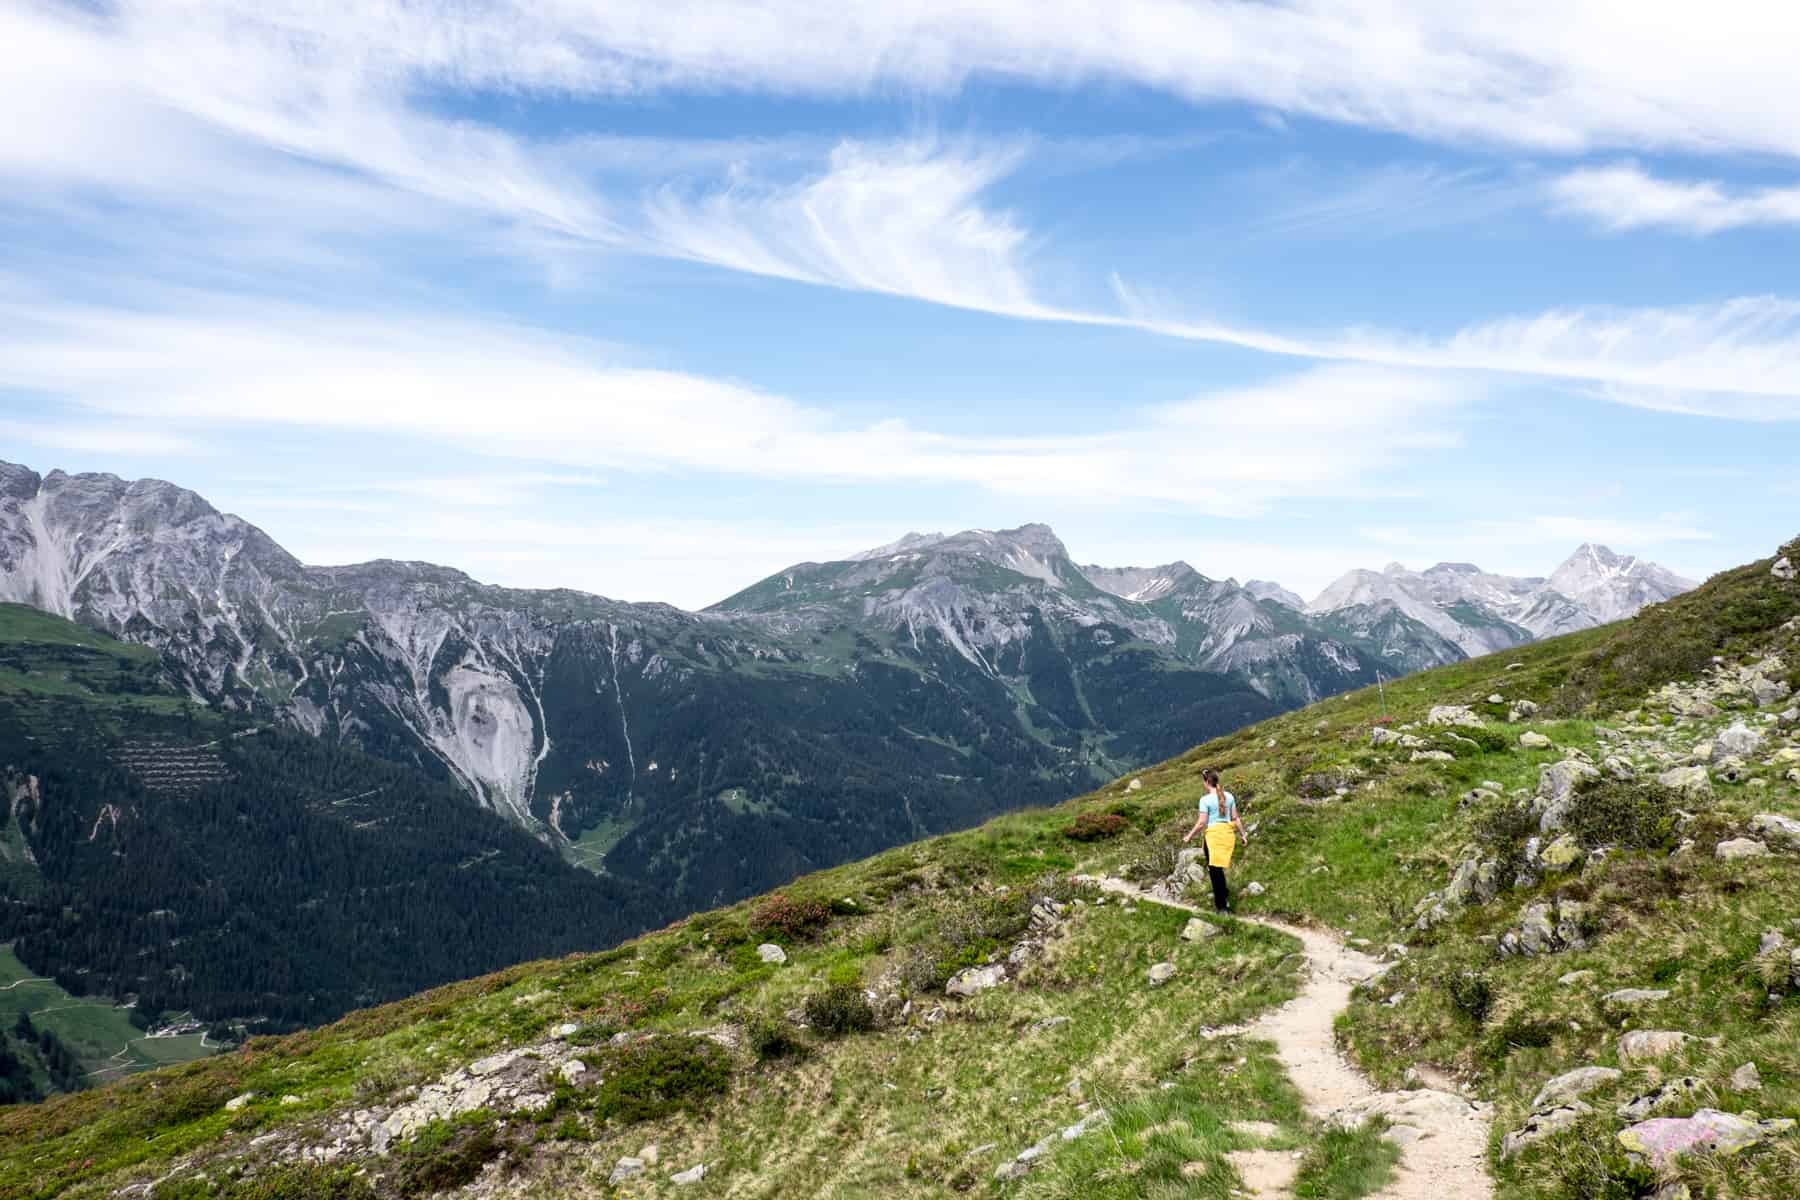 A woman hikes on a narrow hiking trail high on a green mountain in St. Anton. Snow-capped mountains can be seen in the background